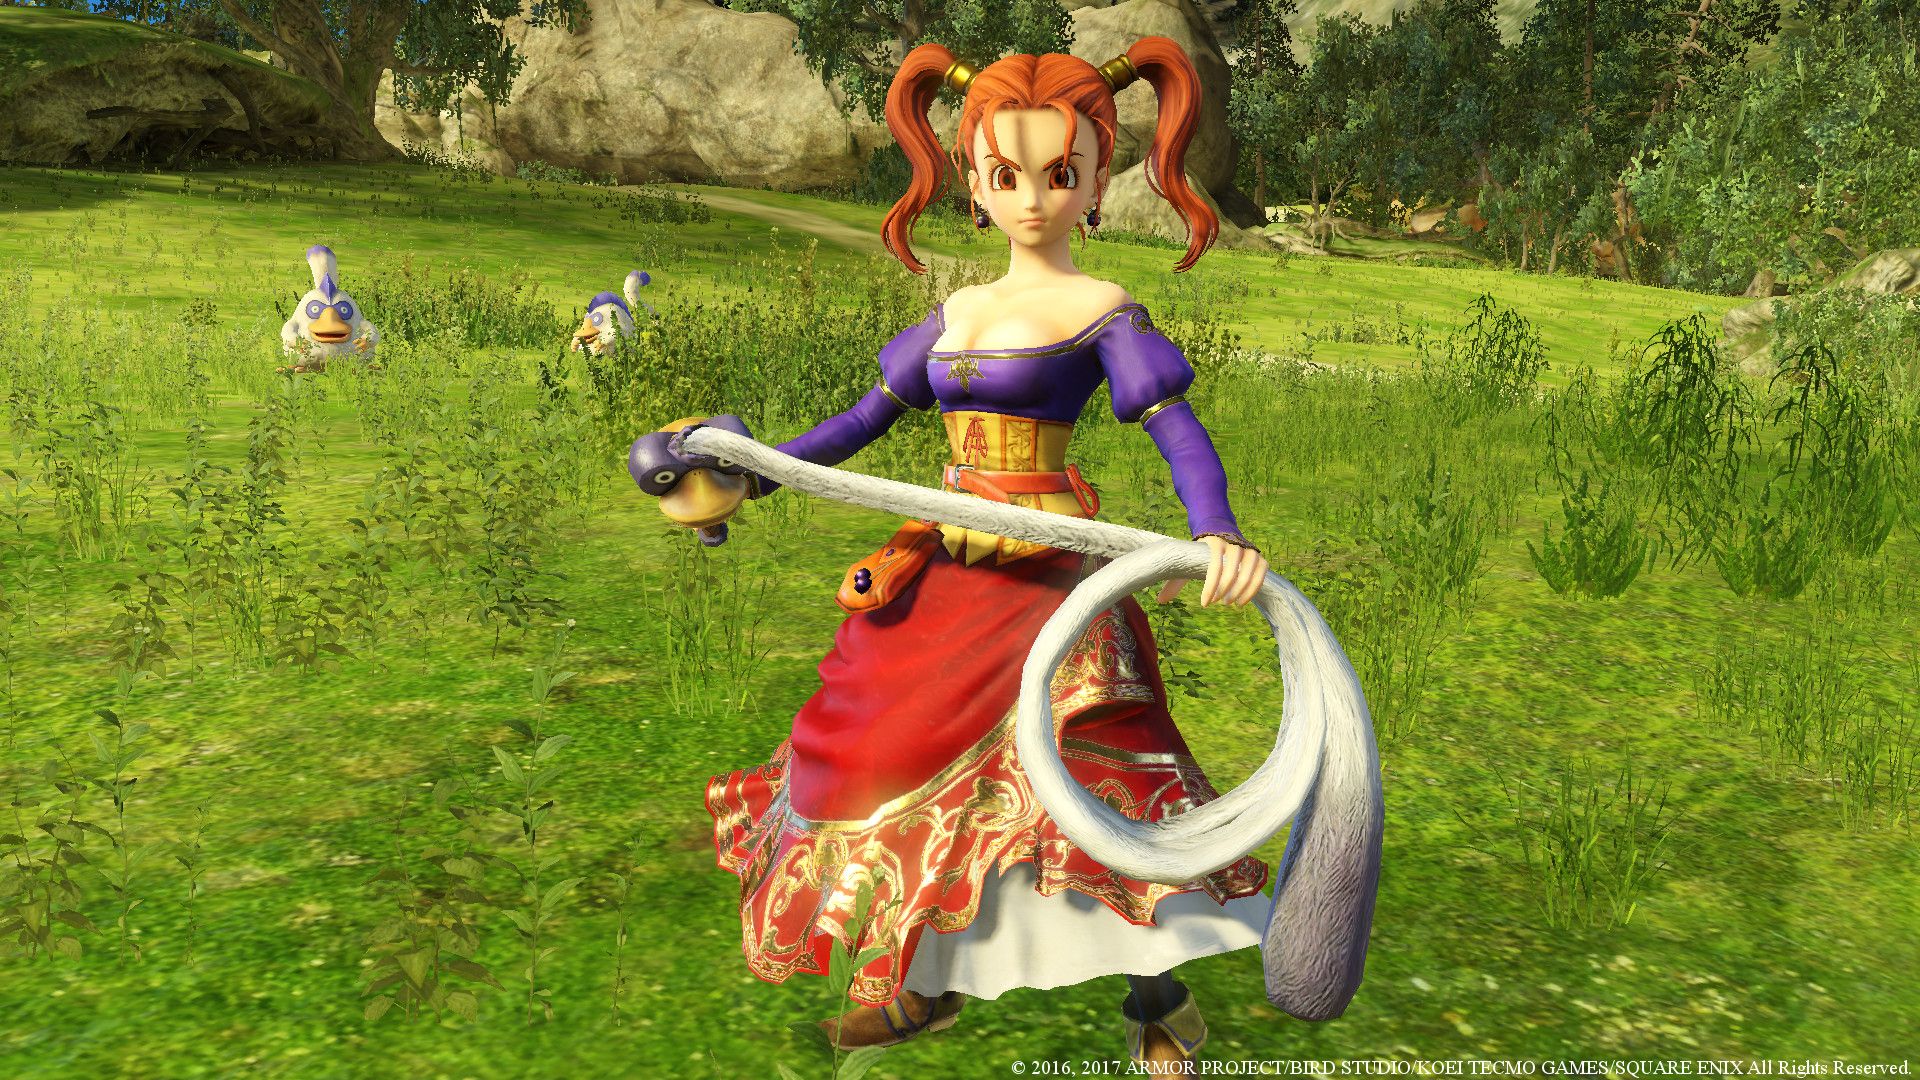 Dragon Quest Heroes Ii Gets New Trailer Starring Jessica And Angelo